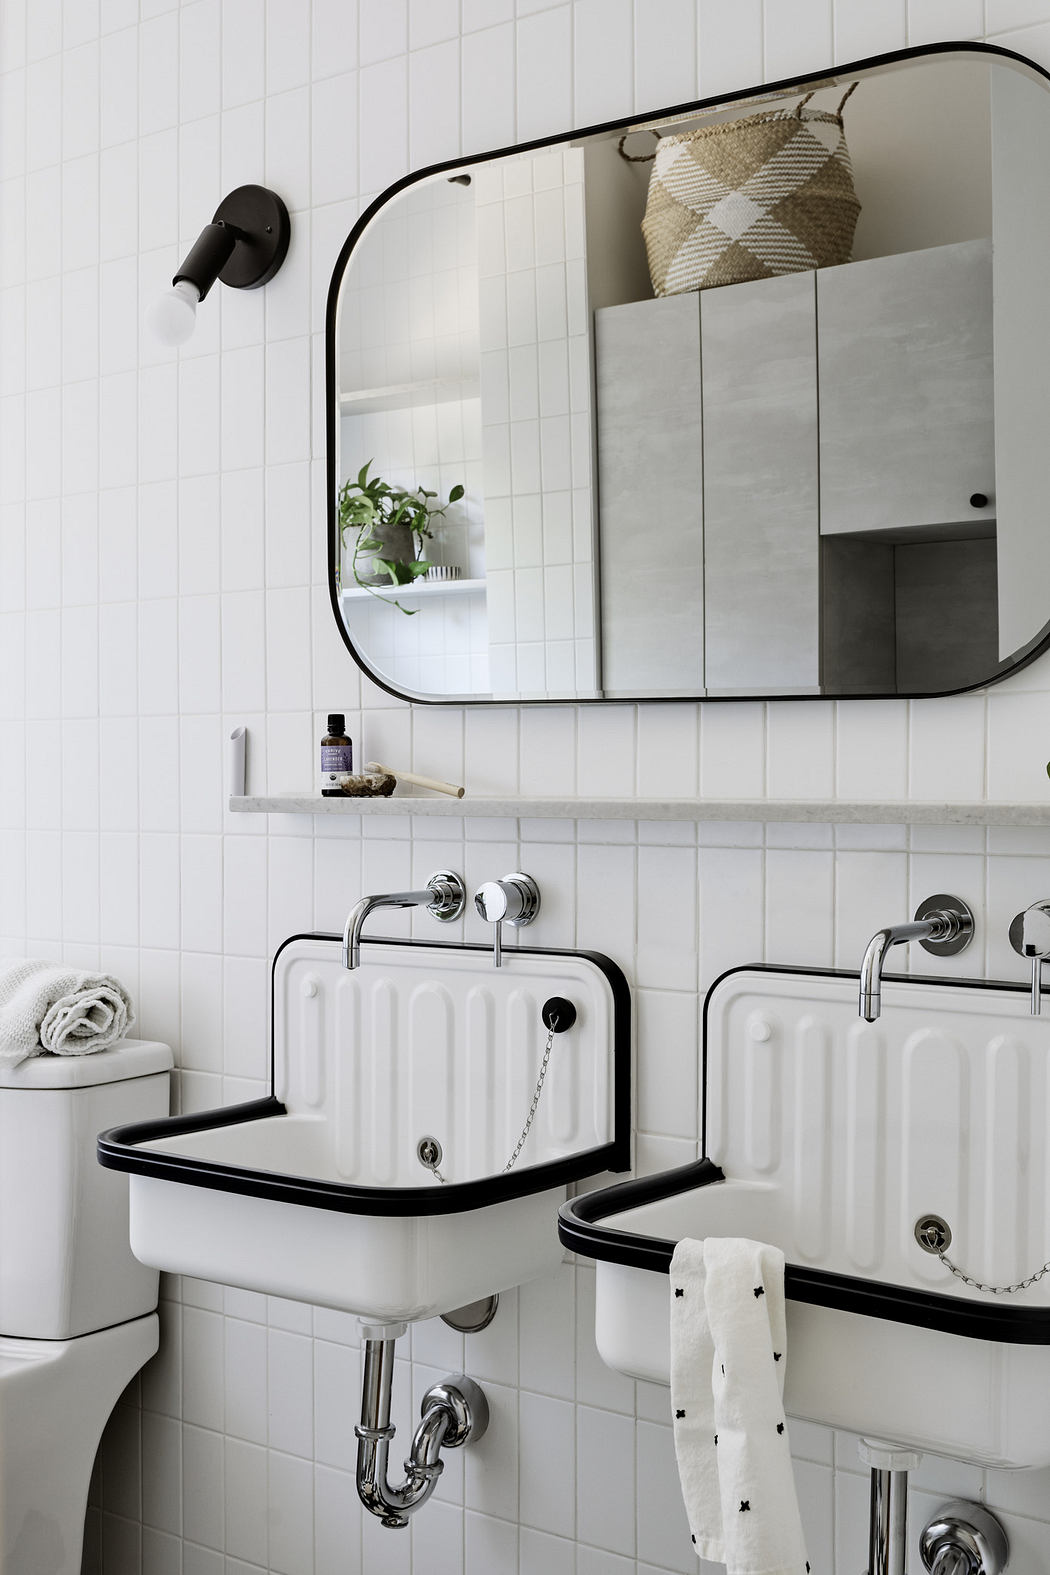 Modern bathroom with white subway tiles and dual wall-mounted sinks.